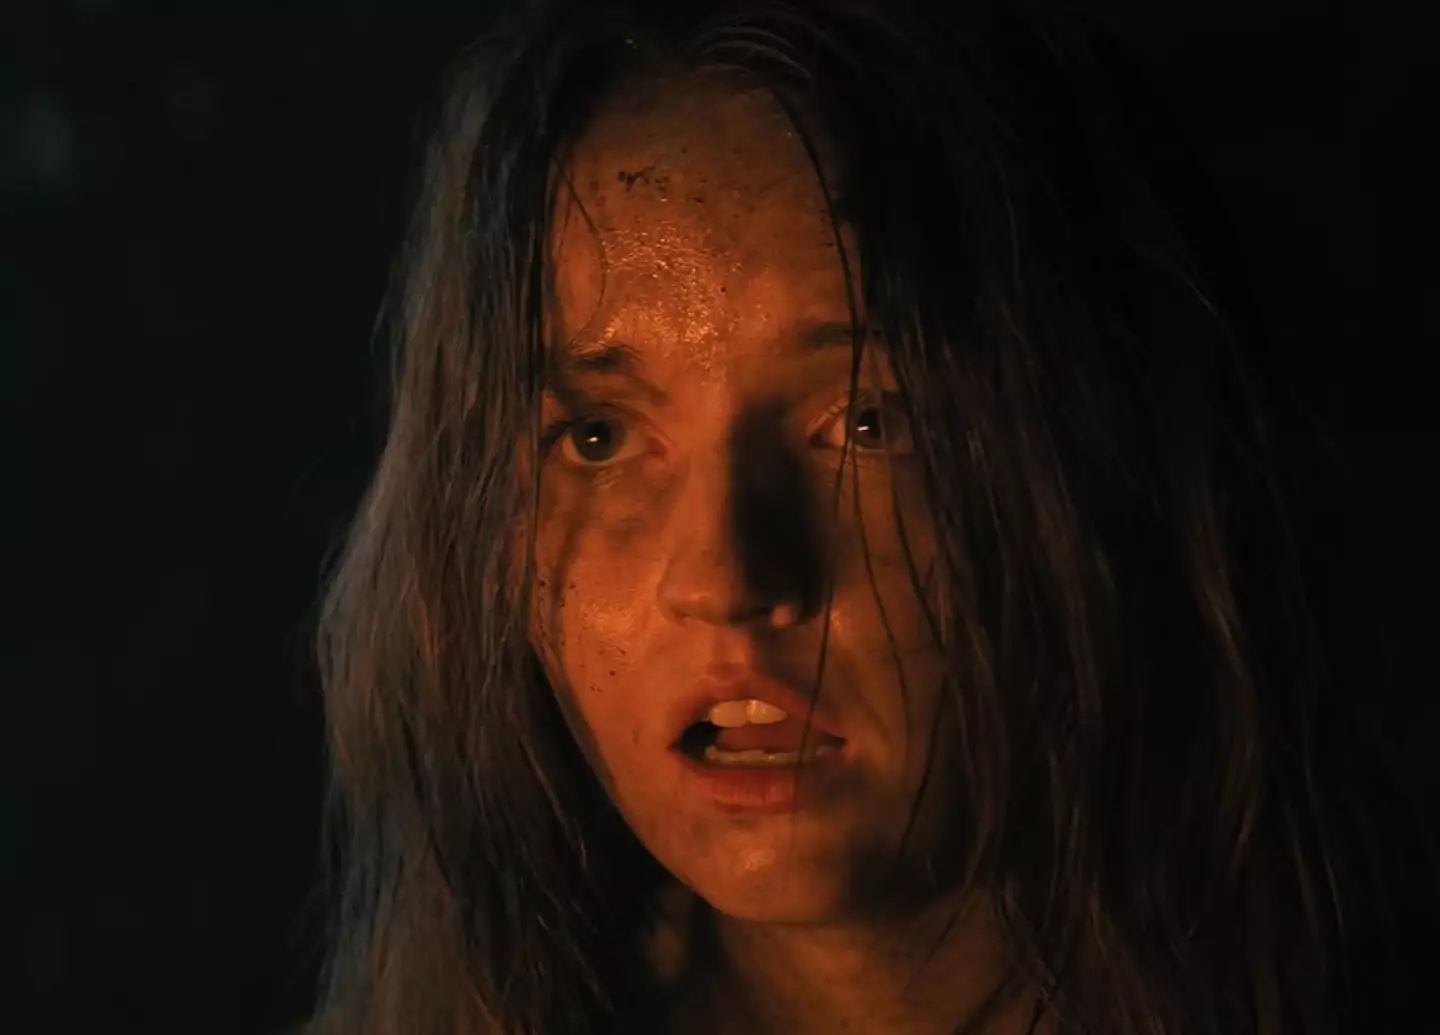 Kaitlyn looking a little worse for wear in the film. Not her fault, like.